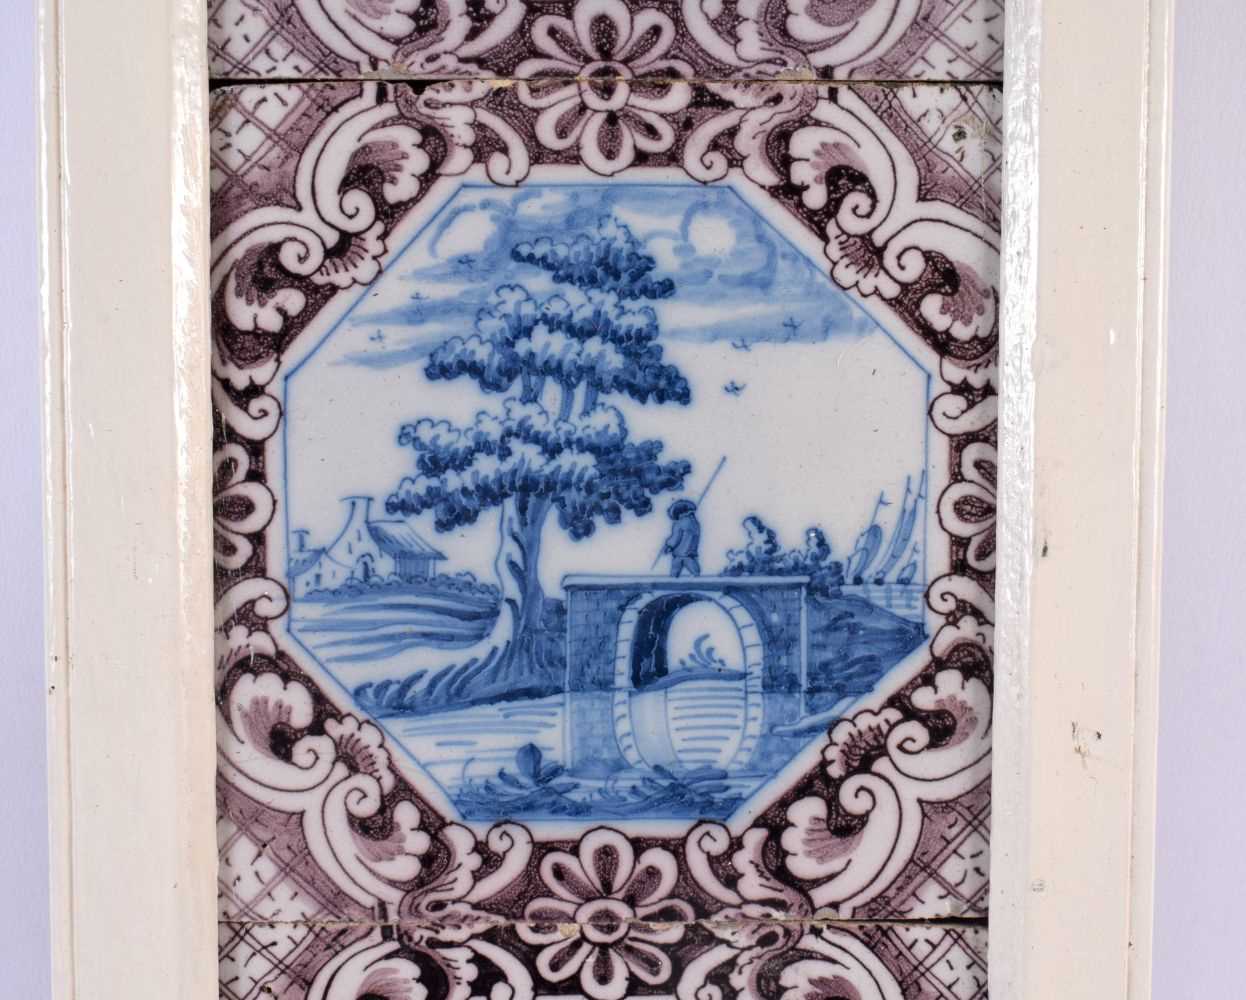 A SET OF THREE 18TH CENTURY DUTCH DELFT MANGANESE BLUE AND WHITE TILES. 42 cm x 15 cm. - Image 3 of 5